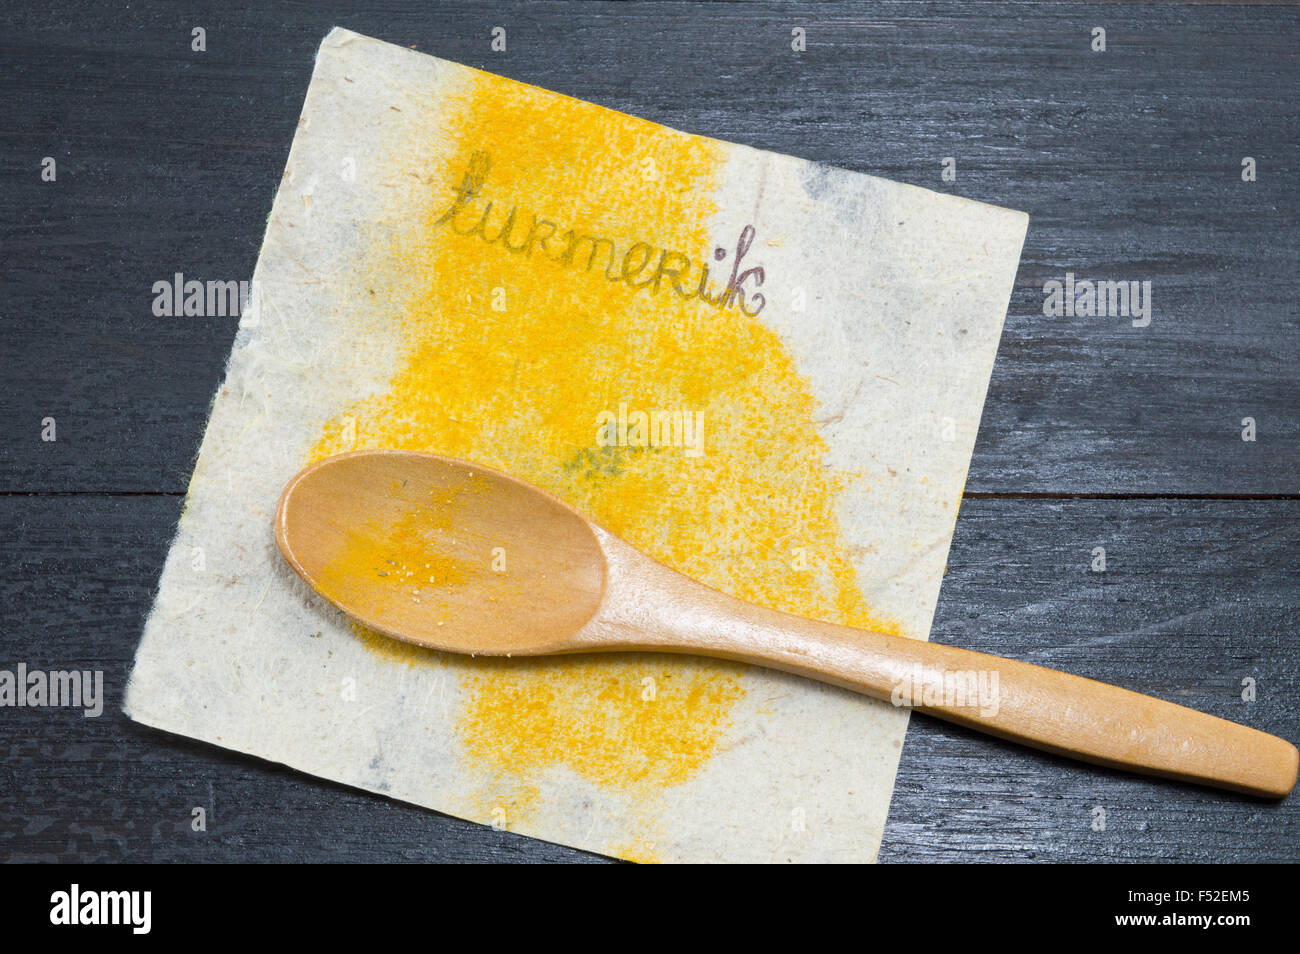 Turmeric spice on labeled recycled paper and a wooden spoon Stock Photo